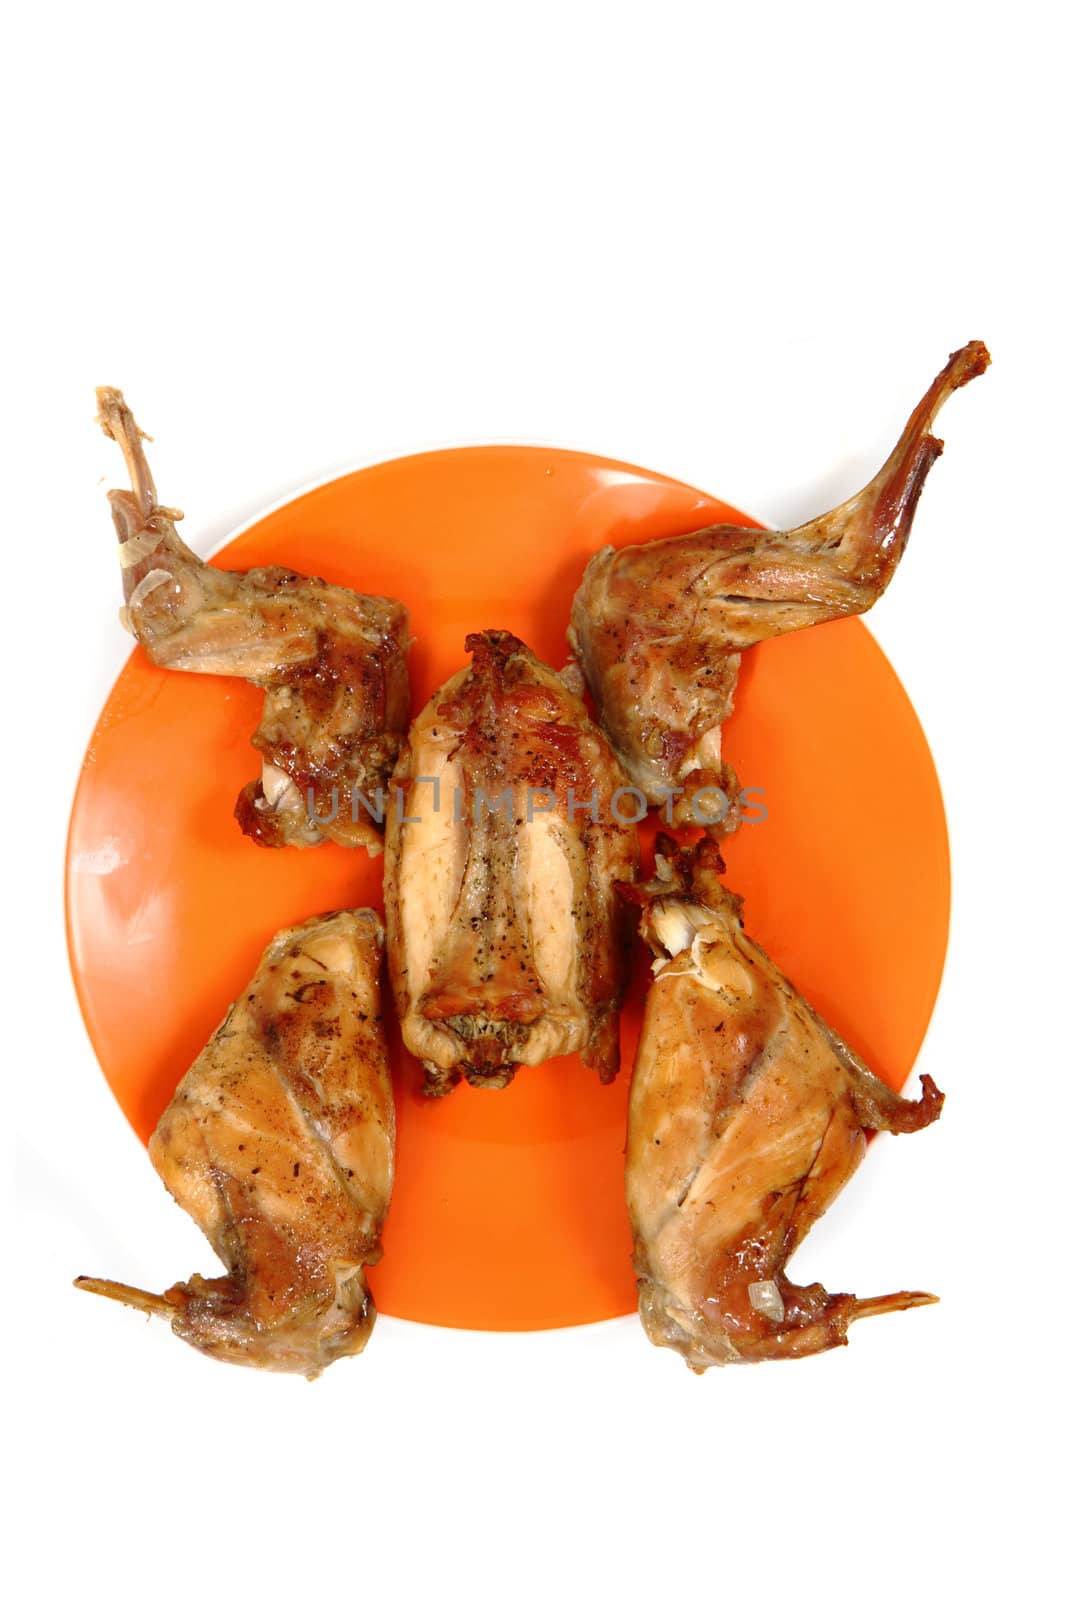 roasted rabbit meat isolated on the white background